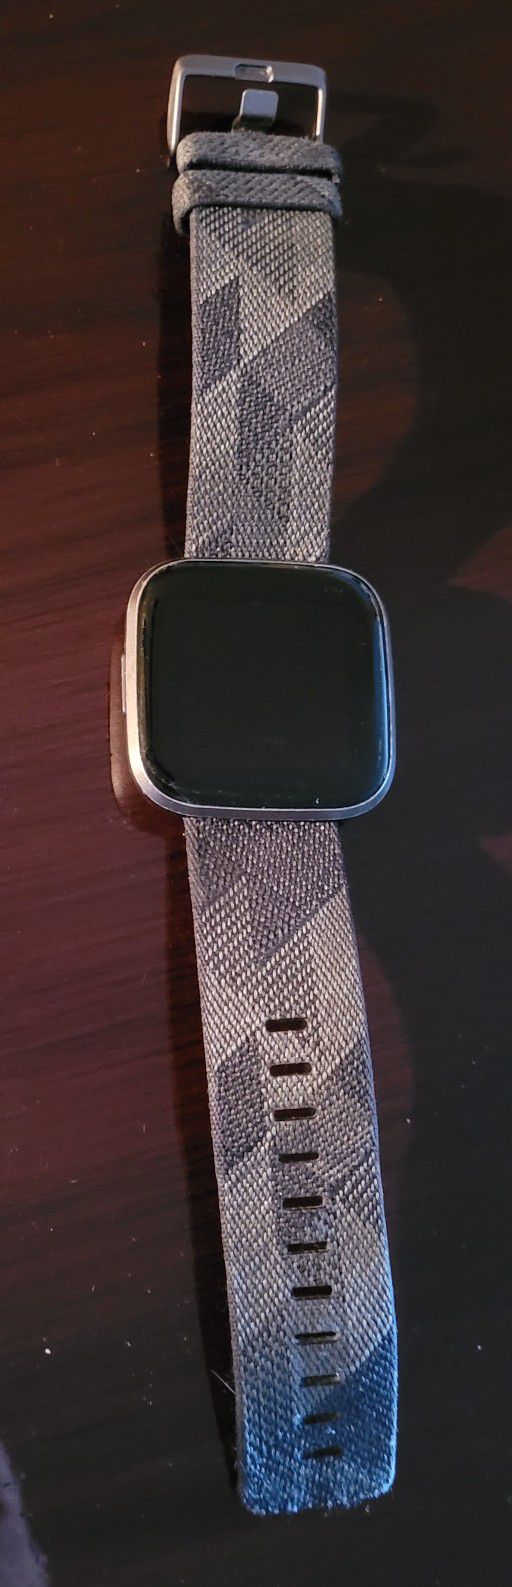 Fitbit Versa 2 Health And Fitness Smartwatch